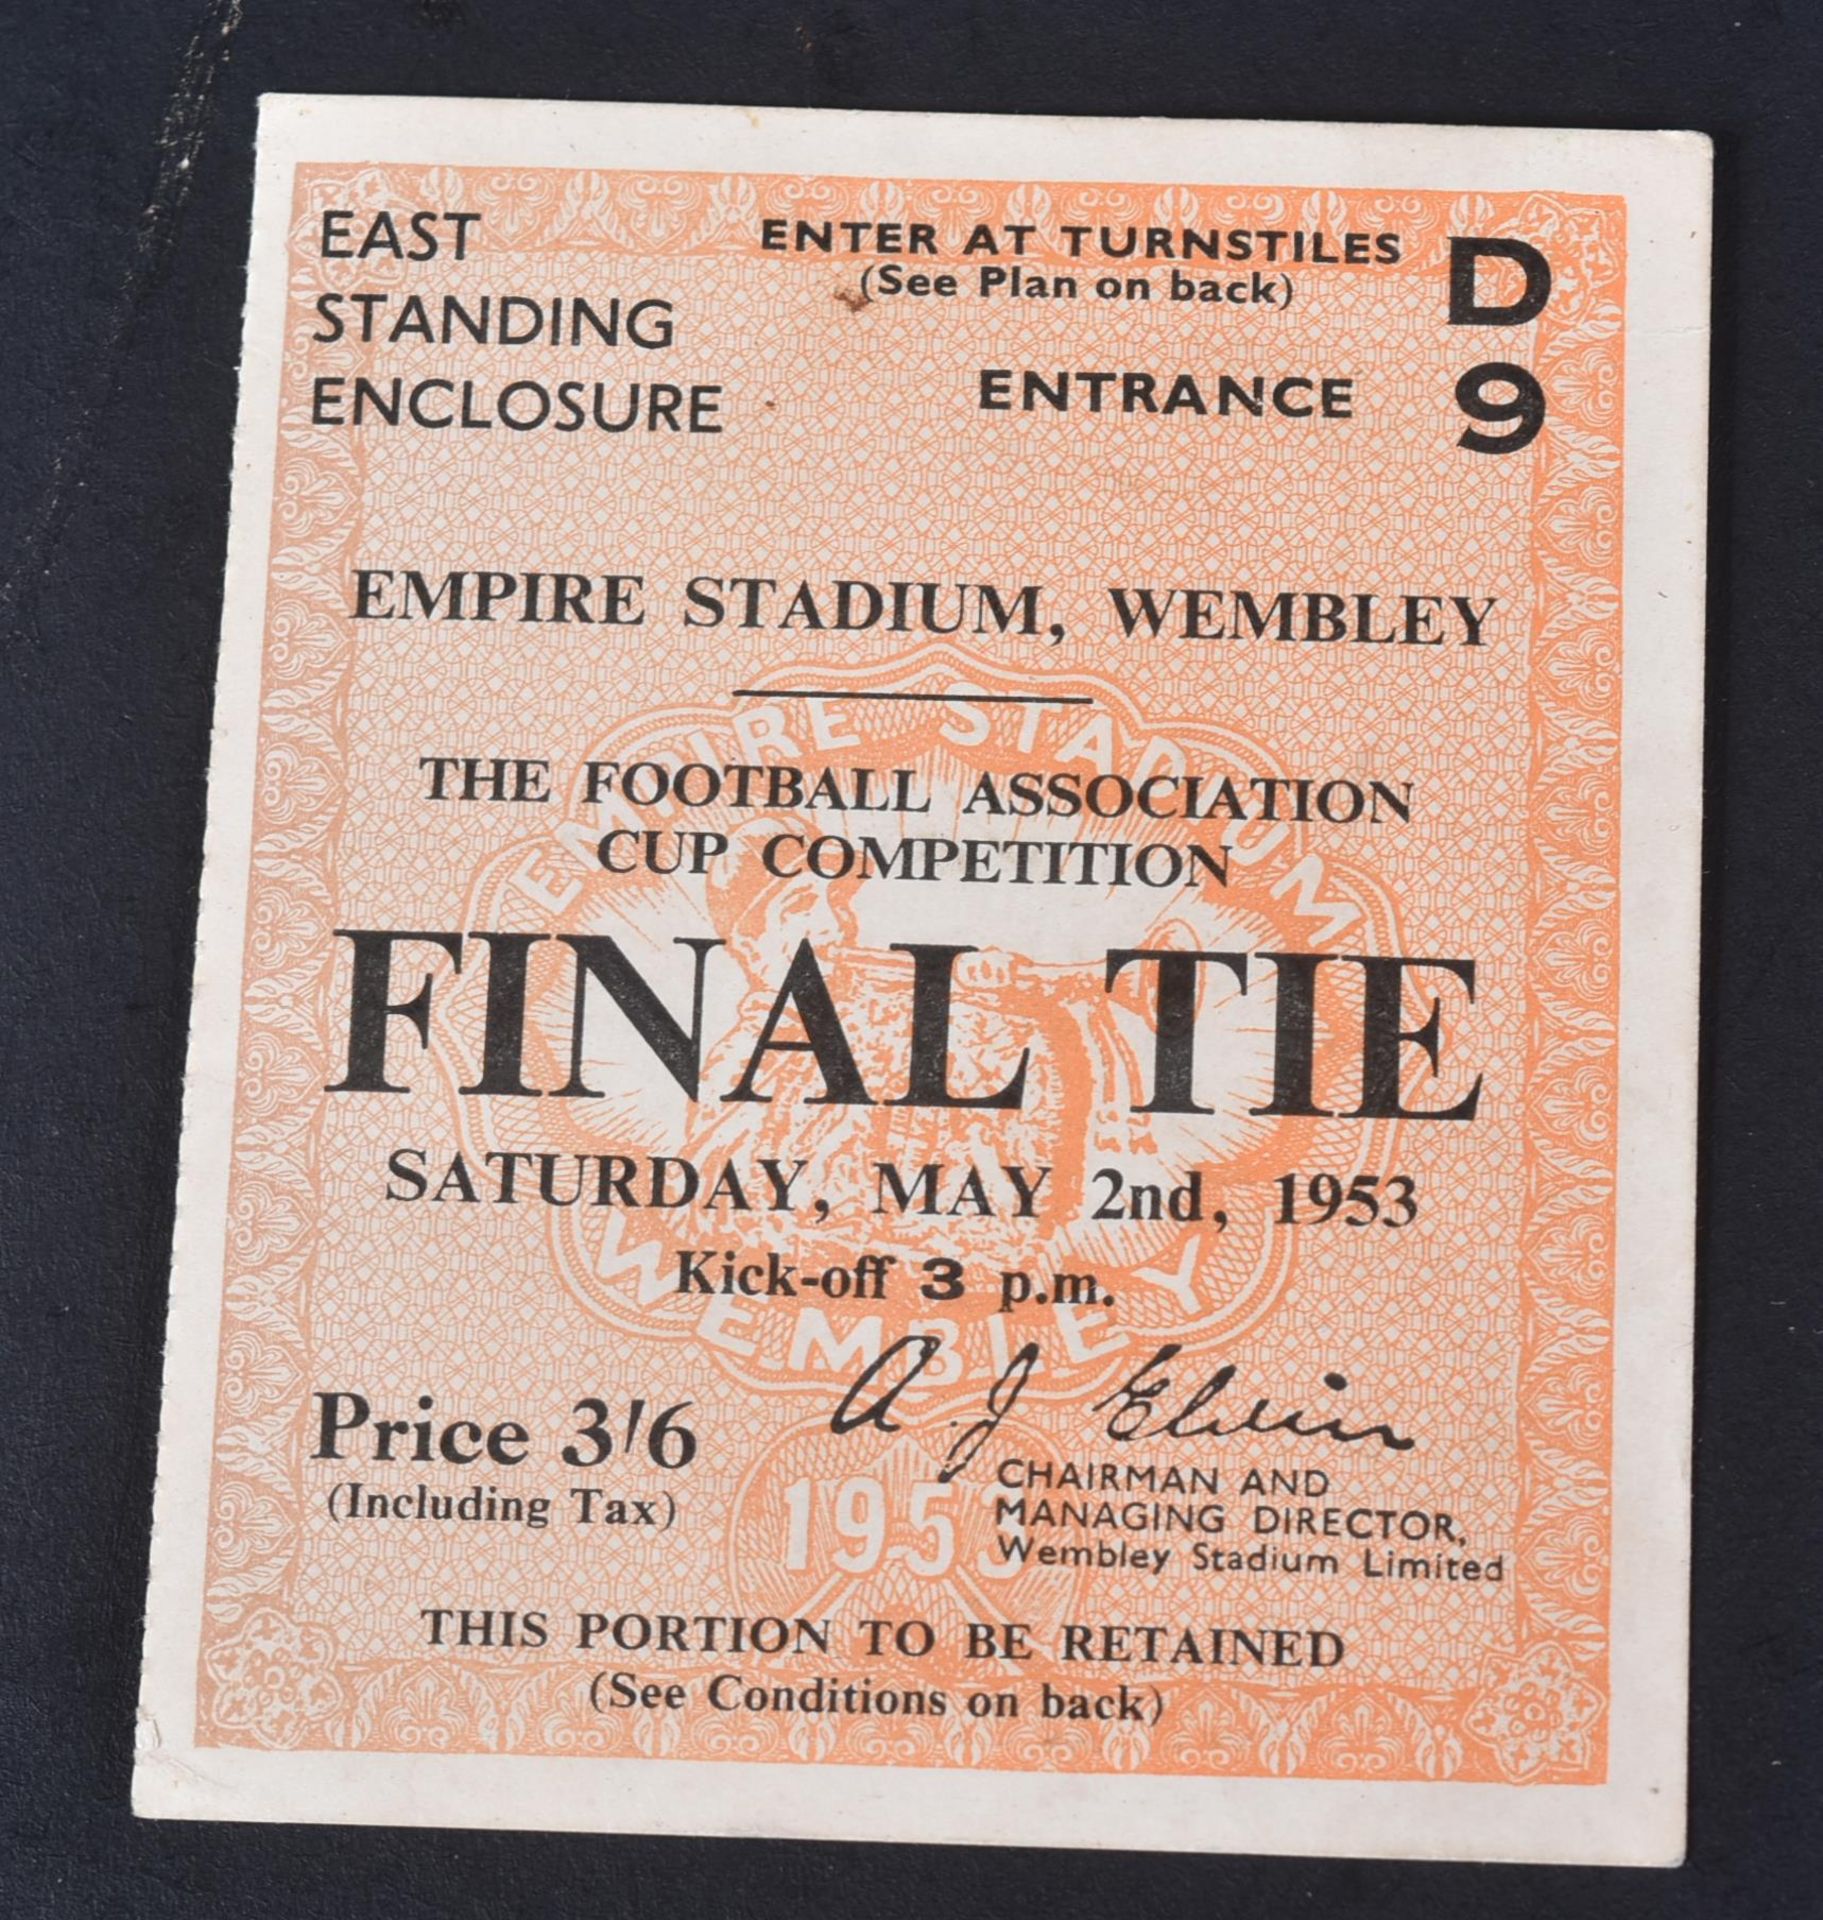 FOOTBALL PROGRAMMES - FINAL TIE MAY 2ND 1953 - Image 6 of 7